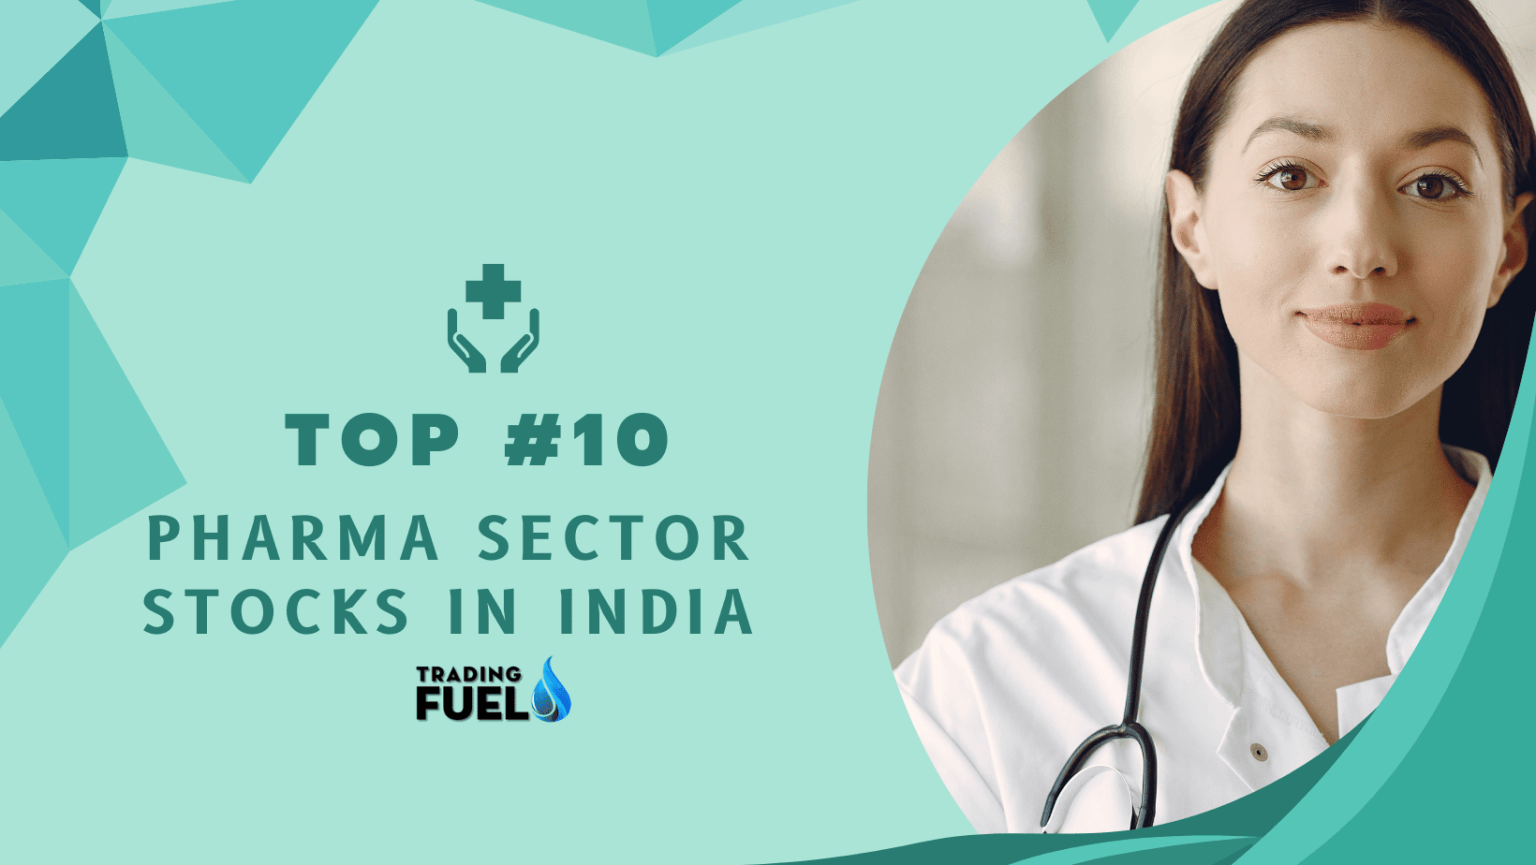 Top 10 Pharma Sector Stocks in India Trading Fuel